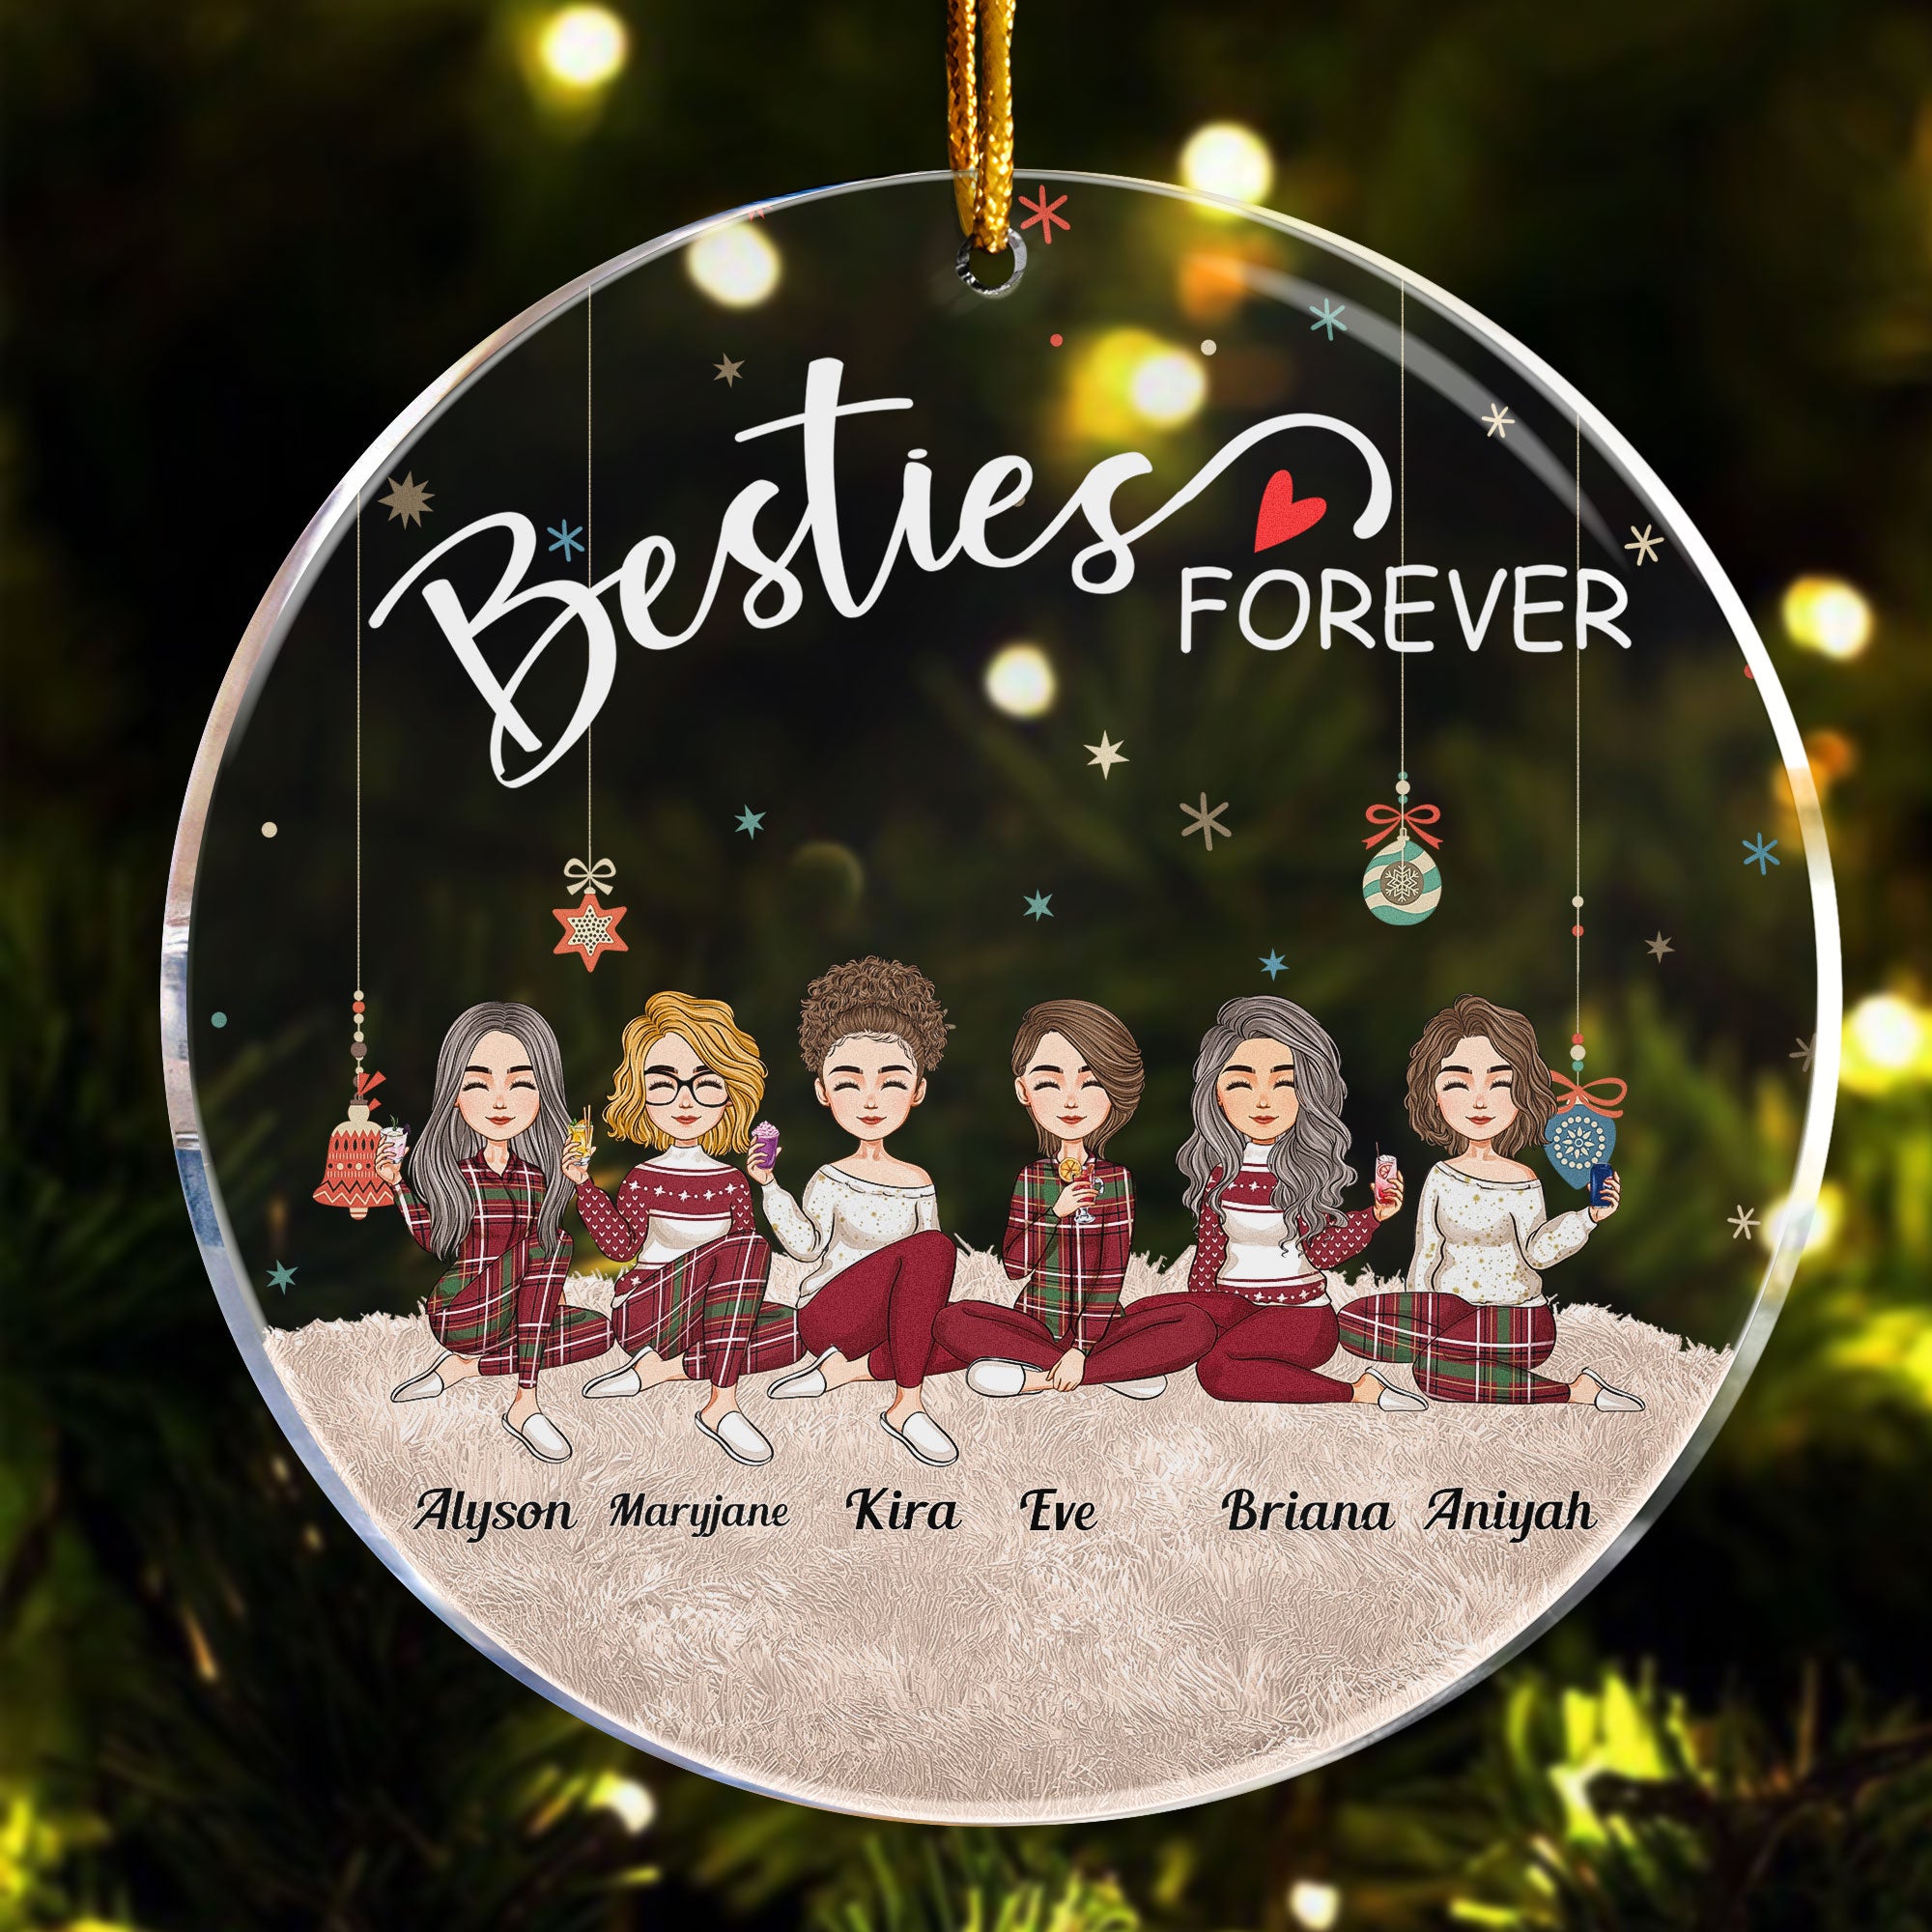 Besties Forever - Personalized Circle Acrylic Ornament - Christmas, New Year Gift For Sistas, Sister, Besties, Best Friends, Soul Sisters  P, 2l e T AR S Alyson. Maryjane Kira Fve Briana Aniyah 